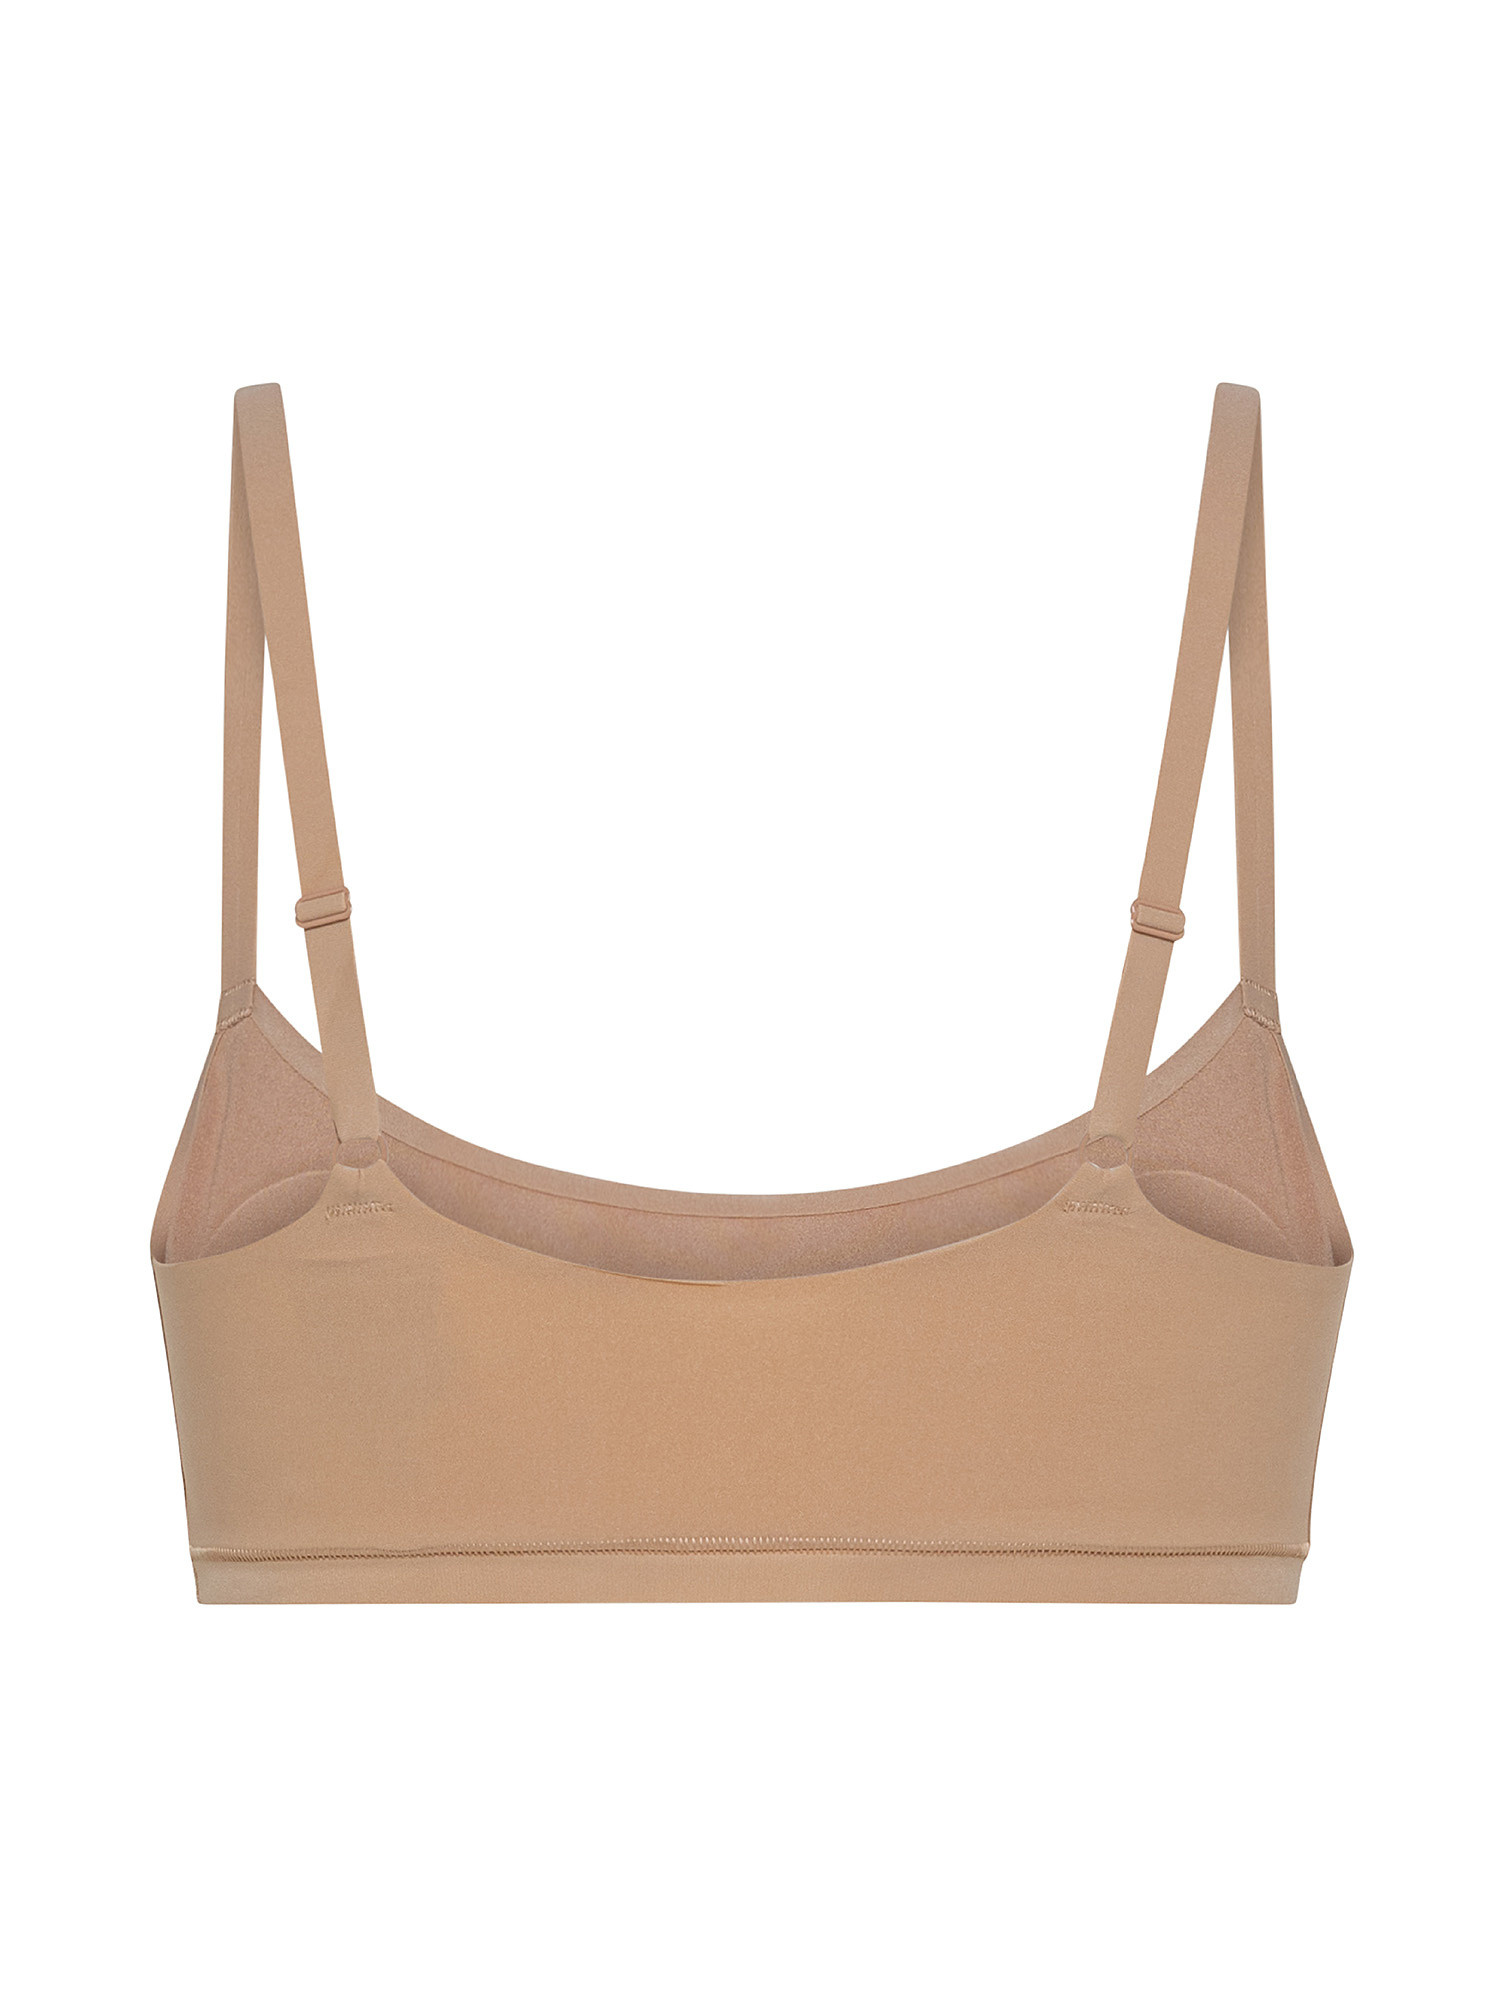 Brassière with rounded neckline, Nude, large image number 1